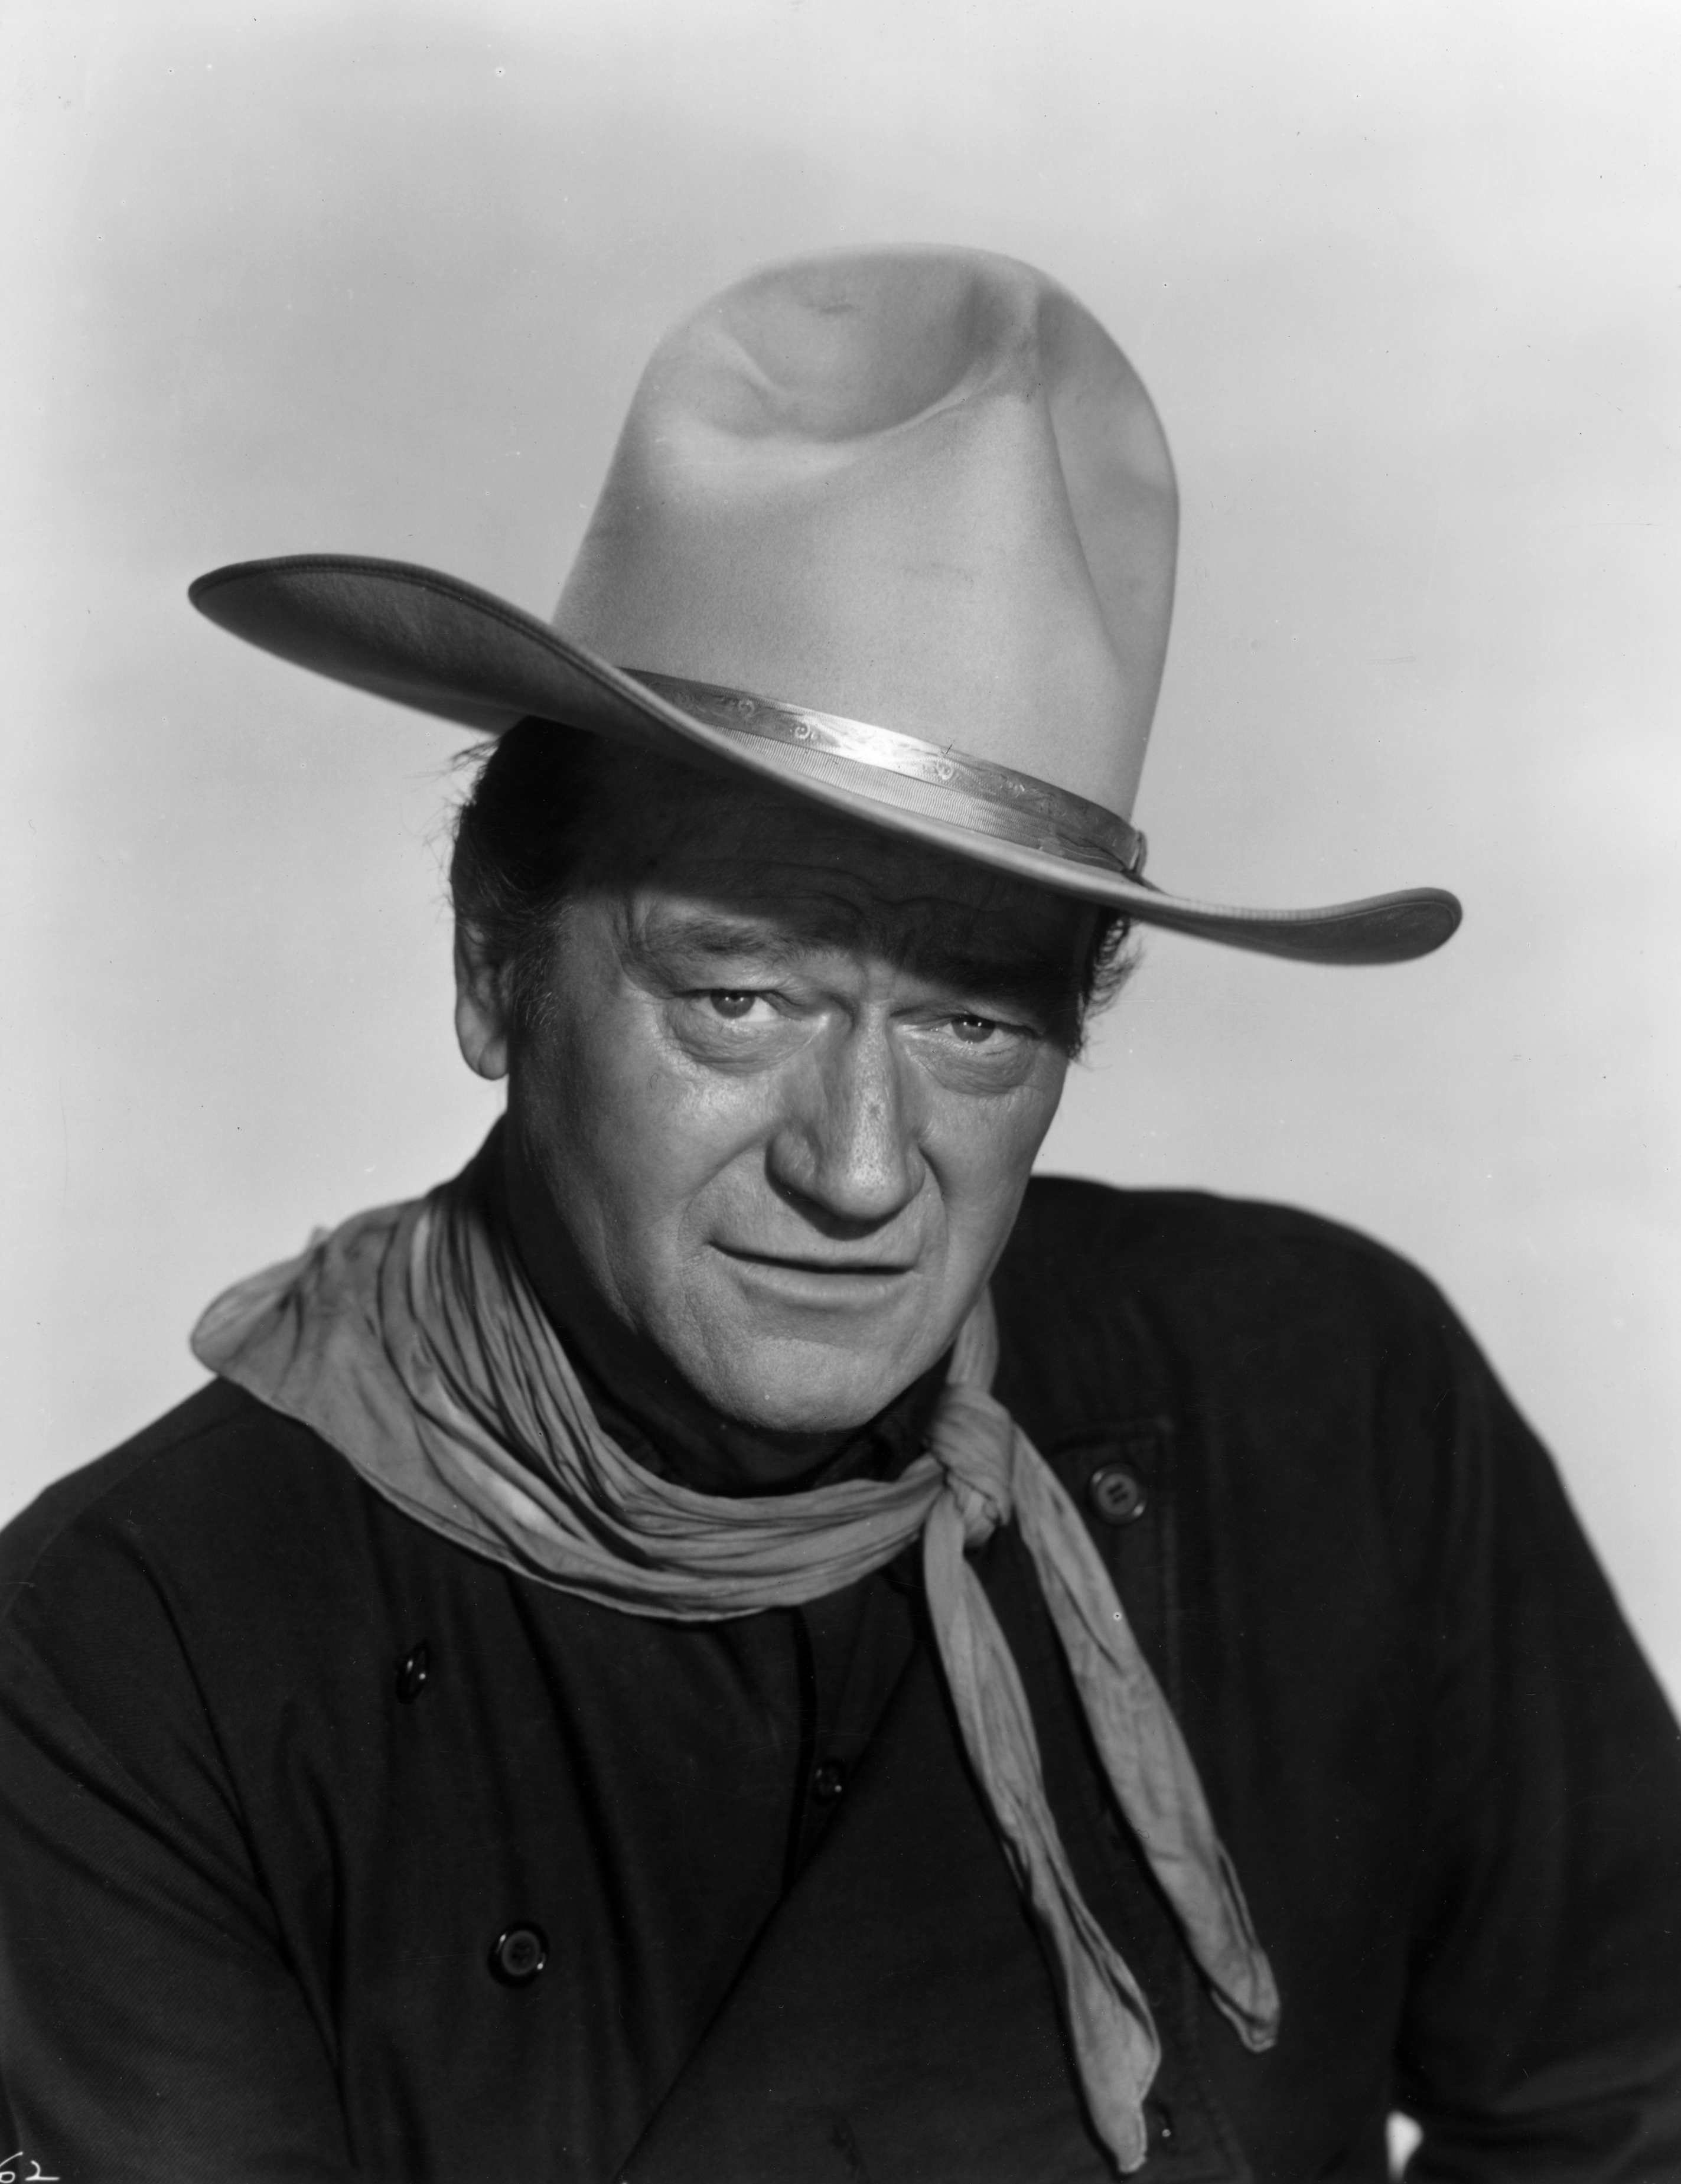 California's 'John Wayne Day' Rejected Over Race Comments | Time